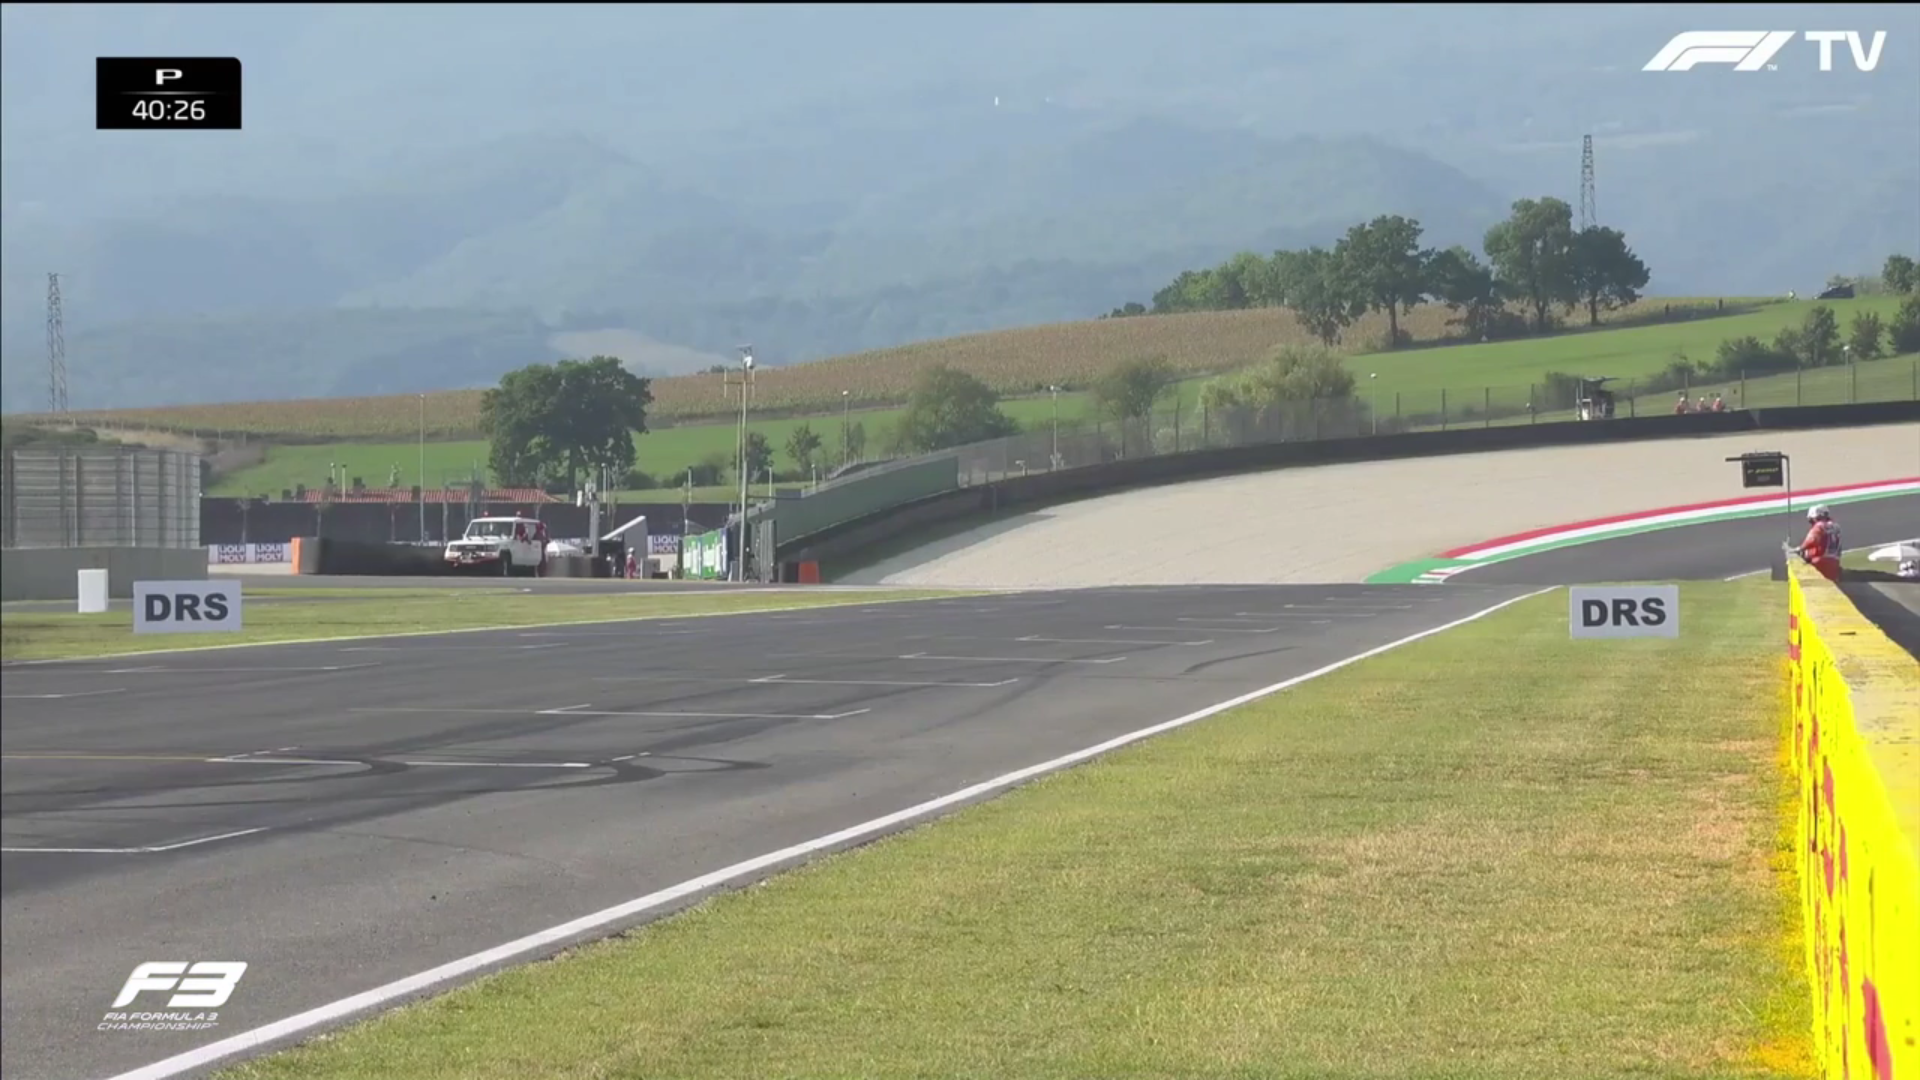 Analysis How F1 and MotoGP have interpreted Mugello differently from a broadcasting perspective